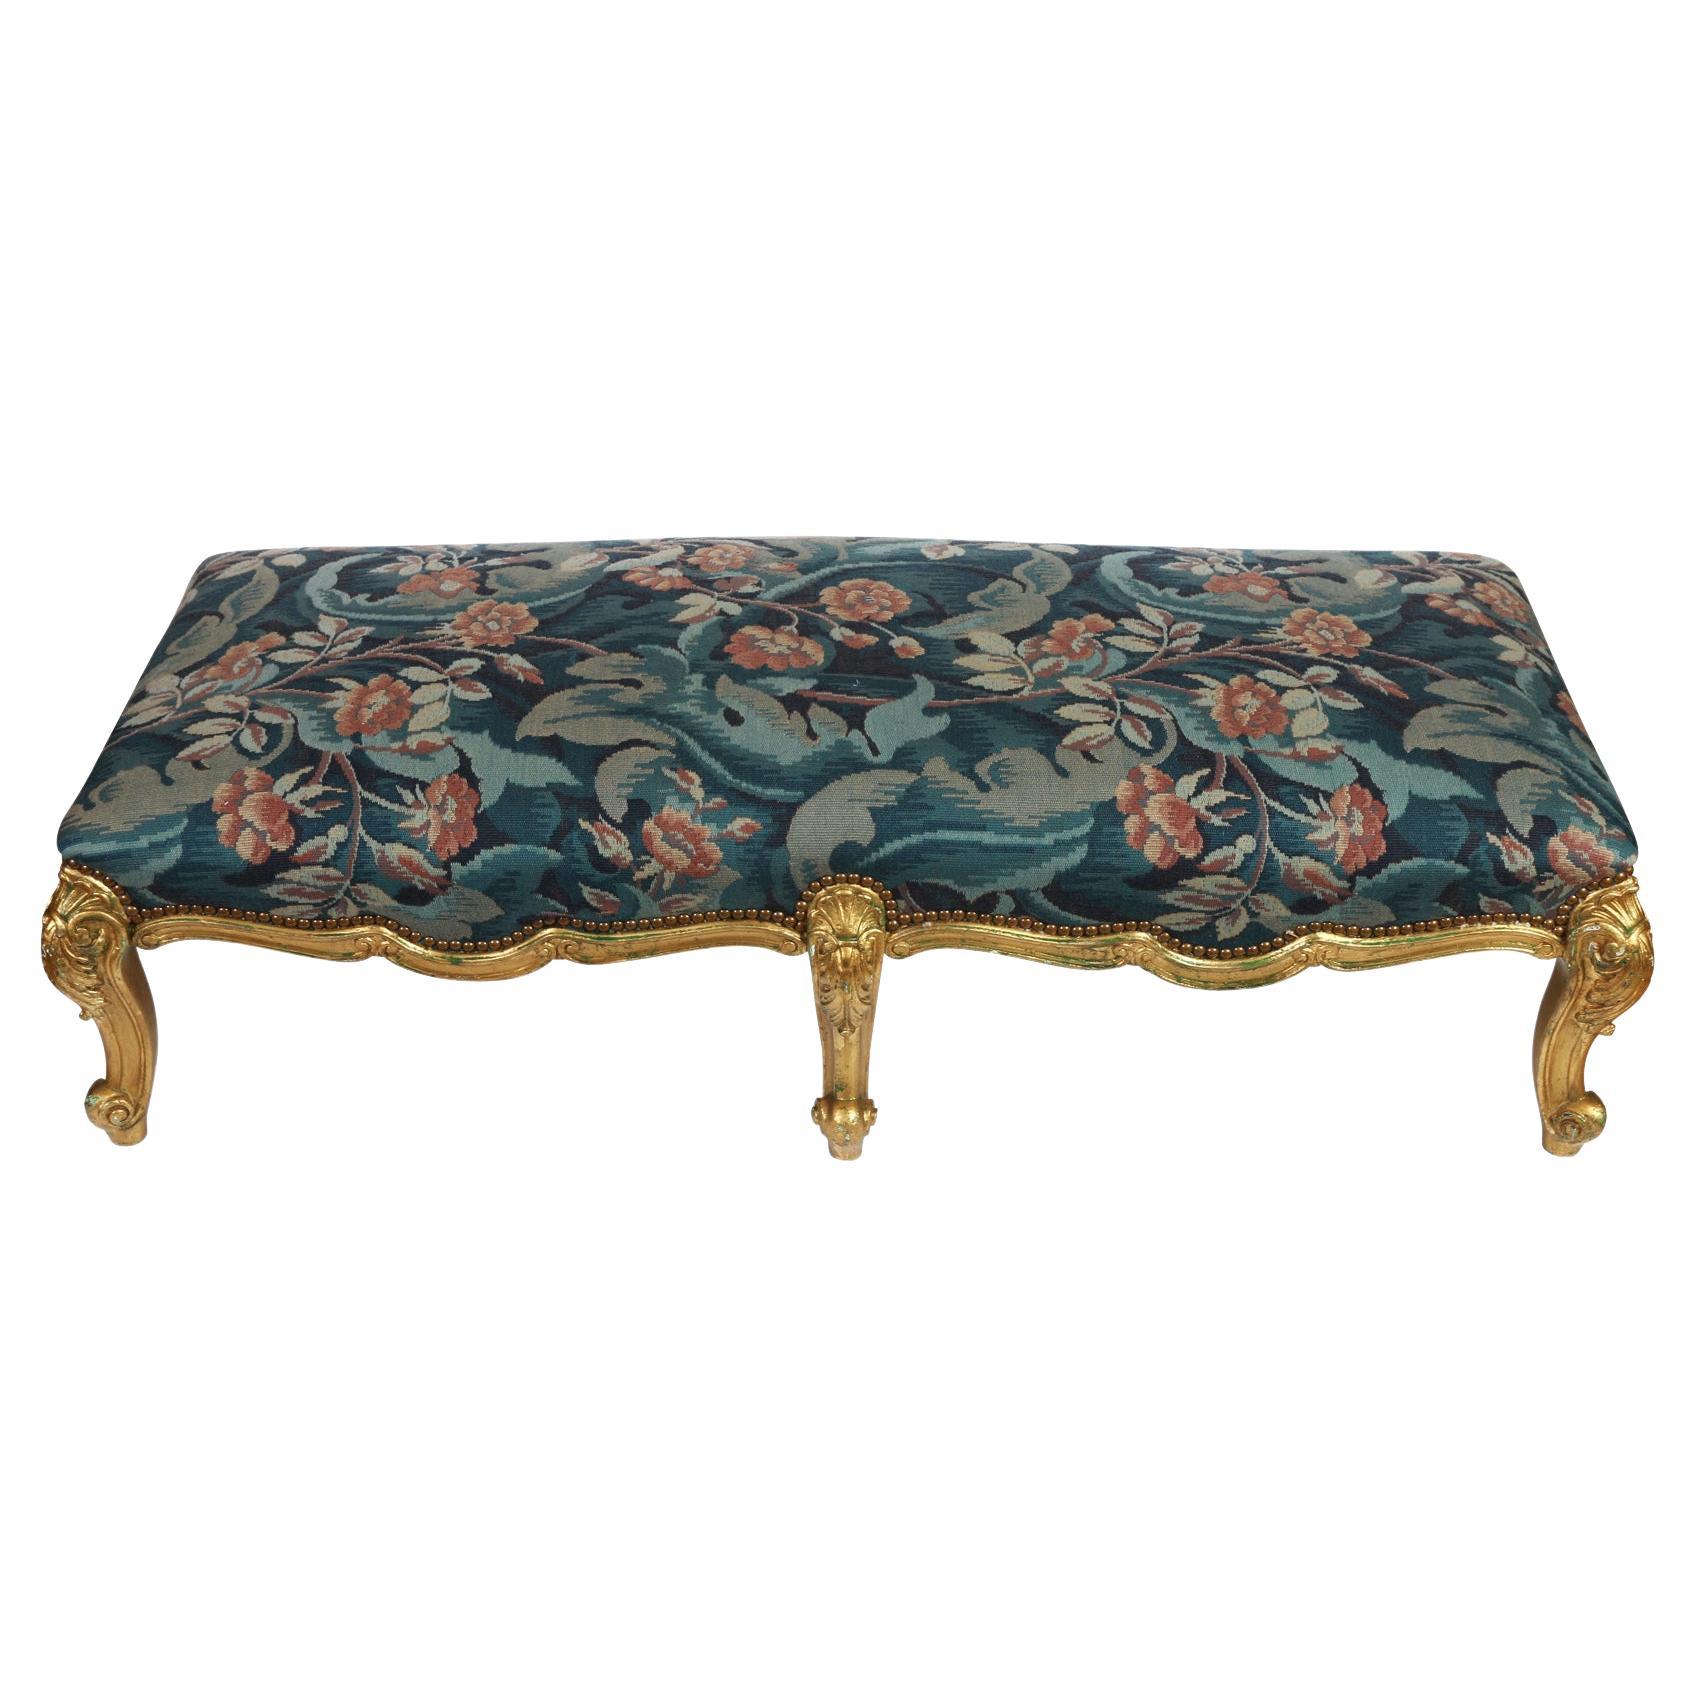 Carved Gilt Oversized Ottoman with Tapestry in Louis XV Style